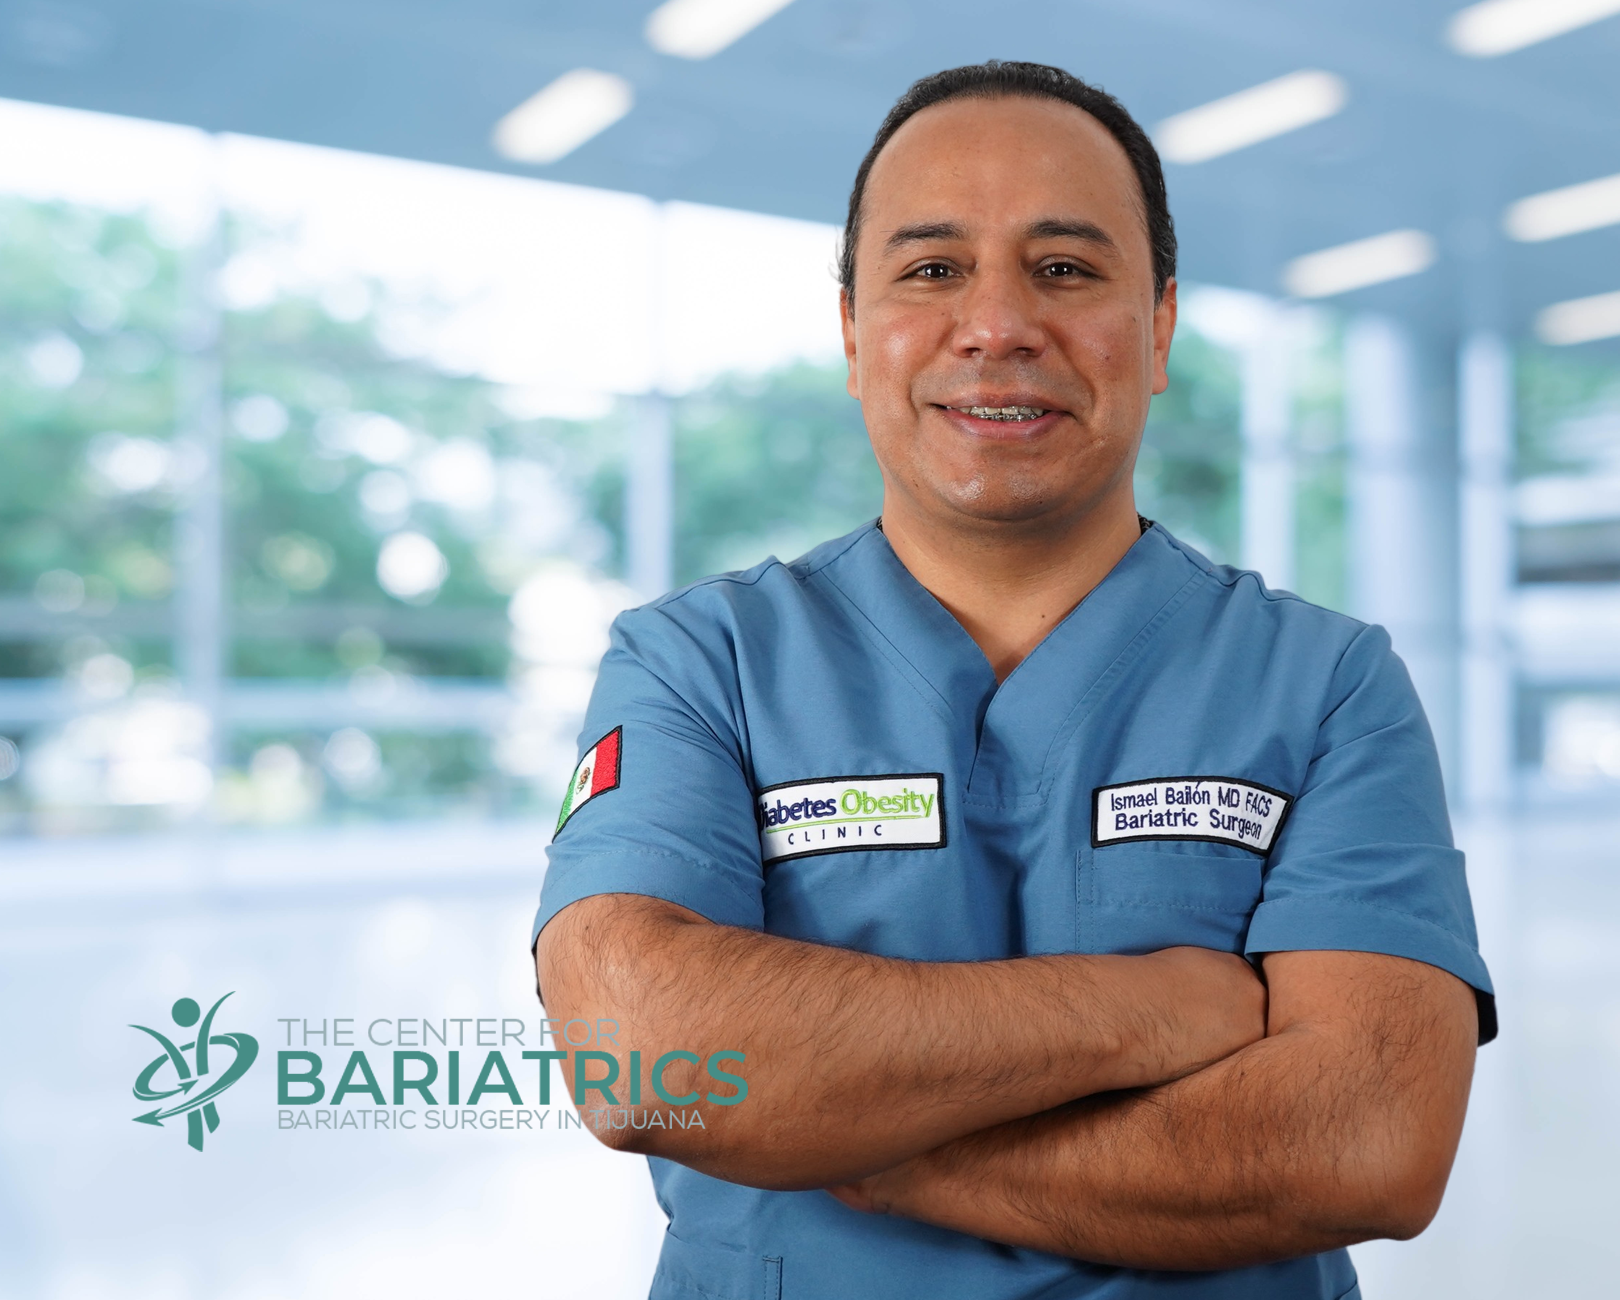 At The Center for Bariatrics, Dr. Ismael Bailon specializes in weight loss surgery procedures.